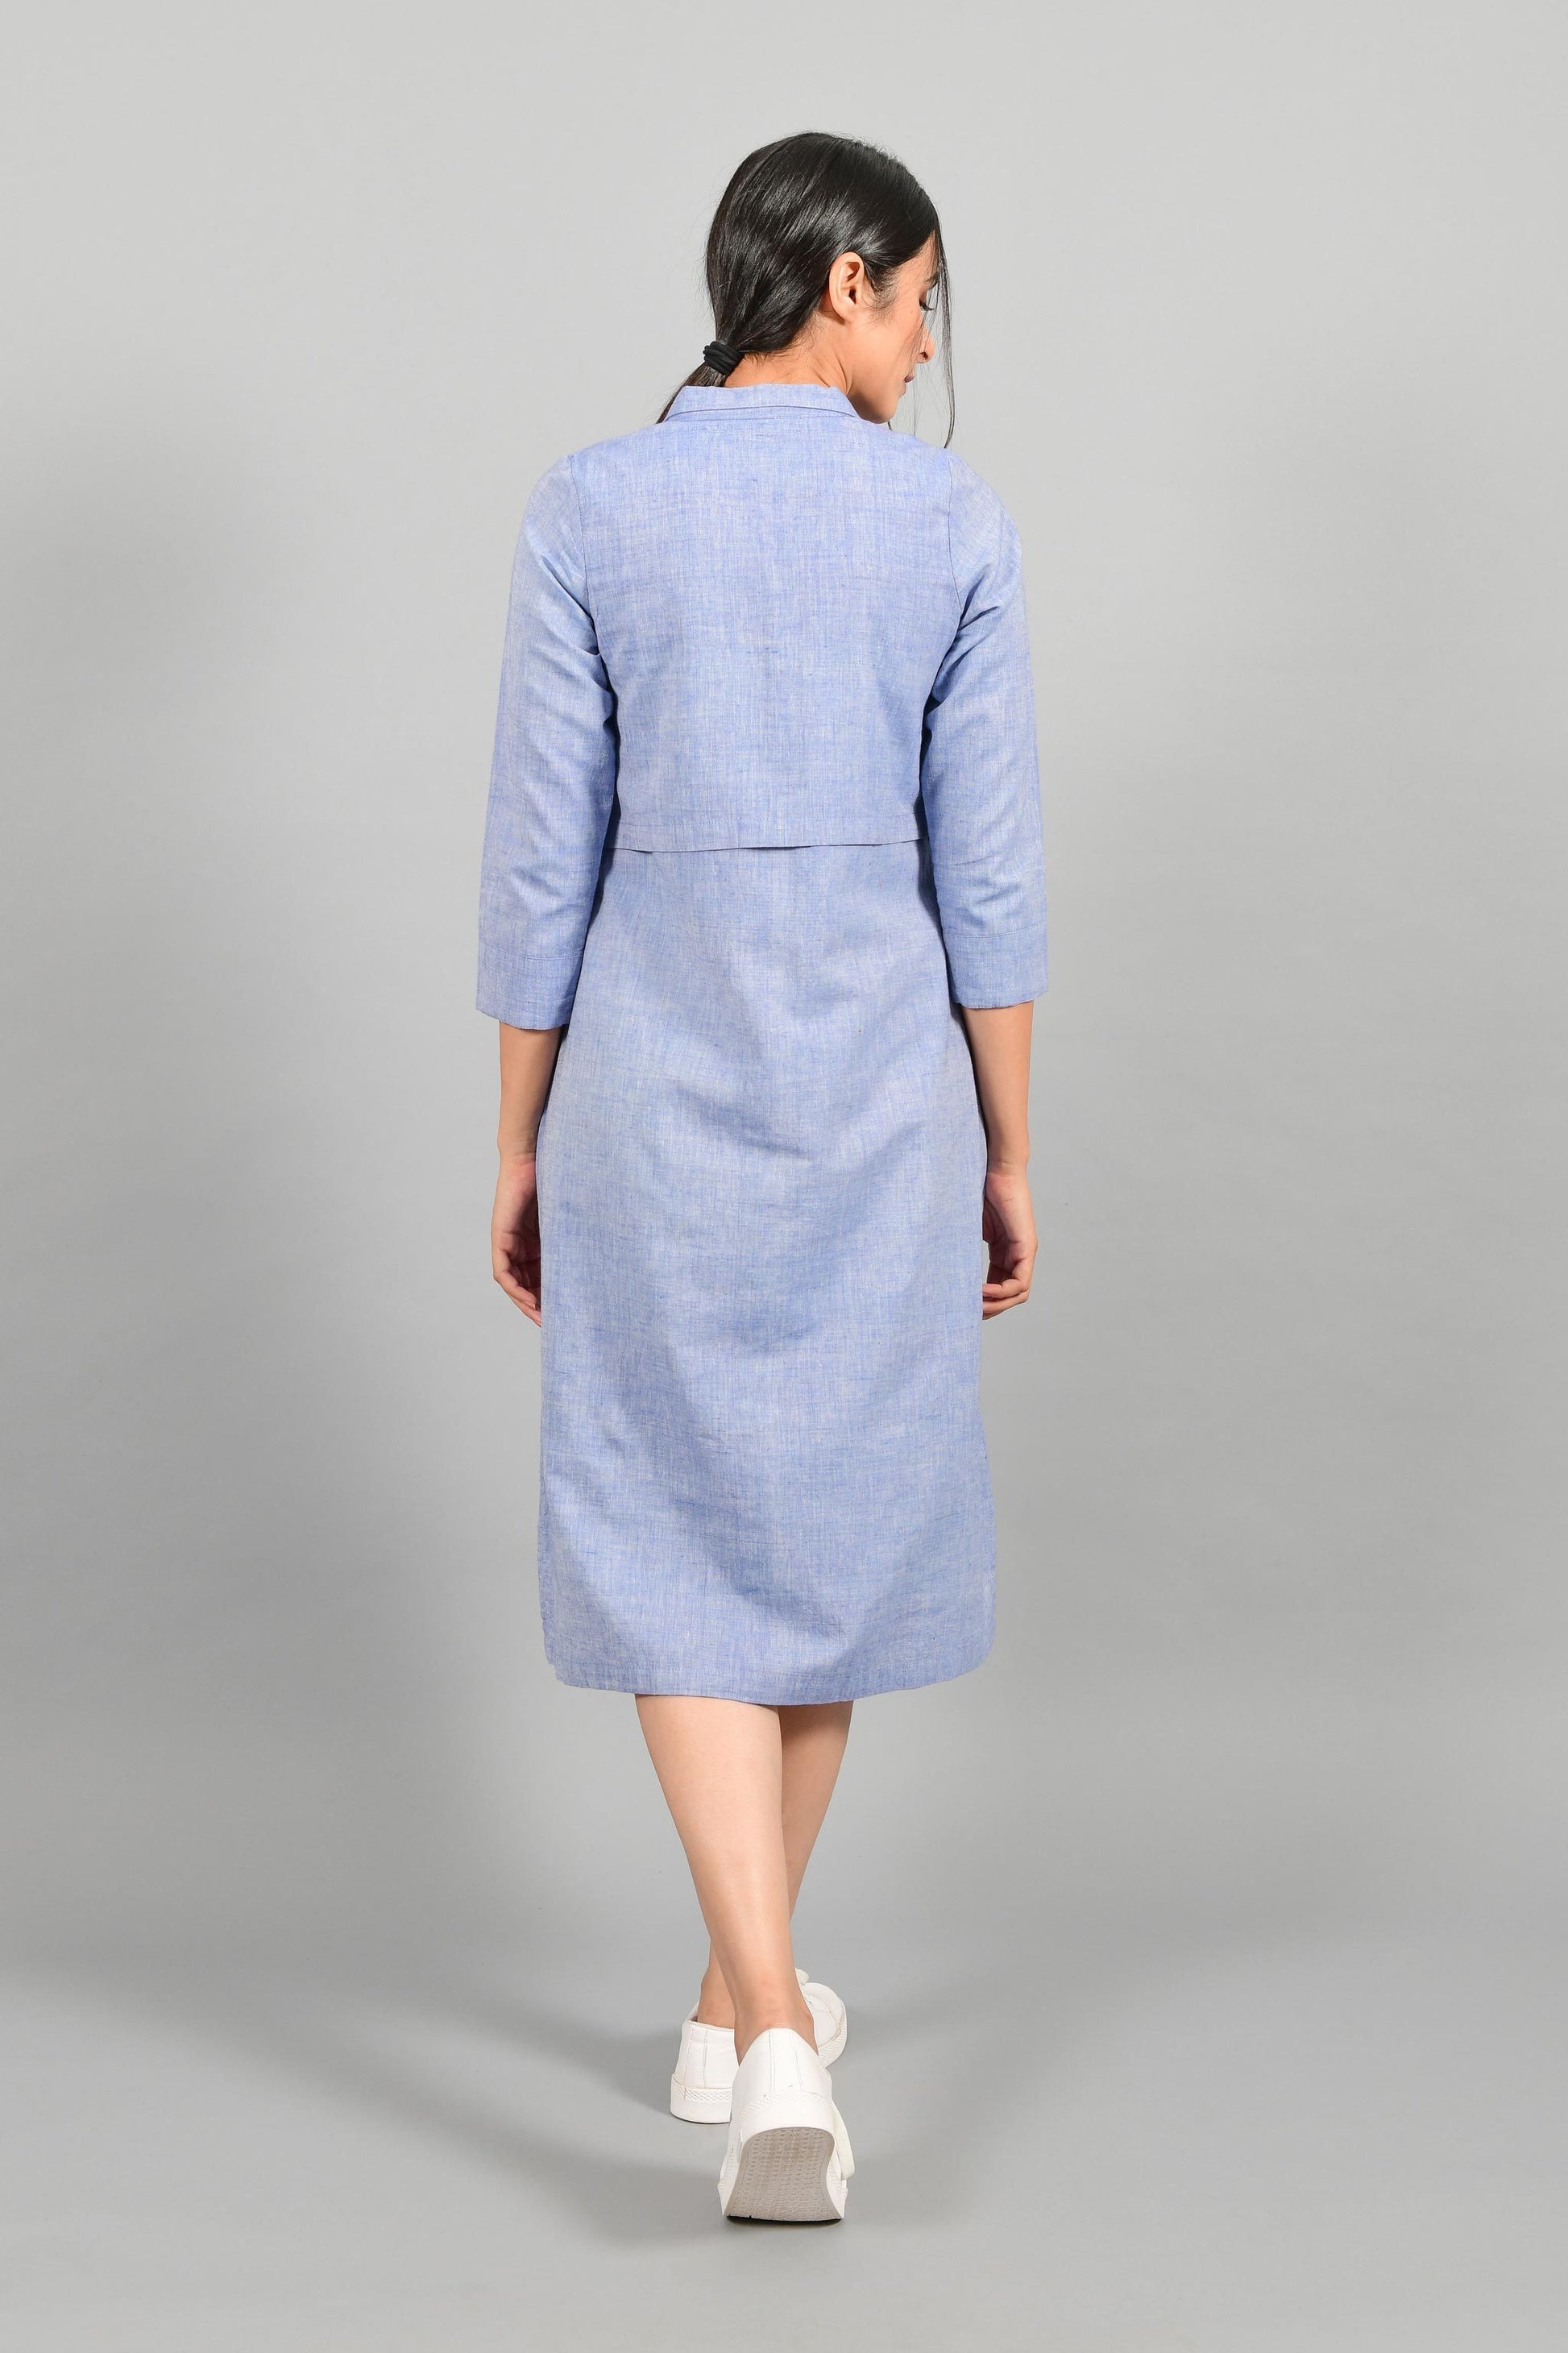 Back pose of an Indian female womenswear fashion model in a blue chambray handspun and handwoven khadi cotton shirt dress by Cotton Rack.